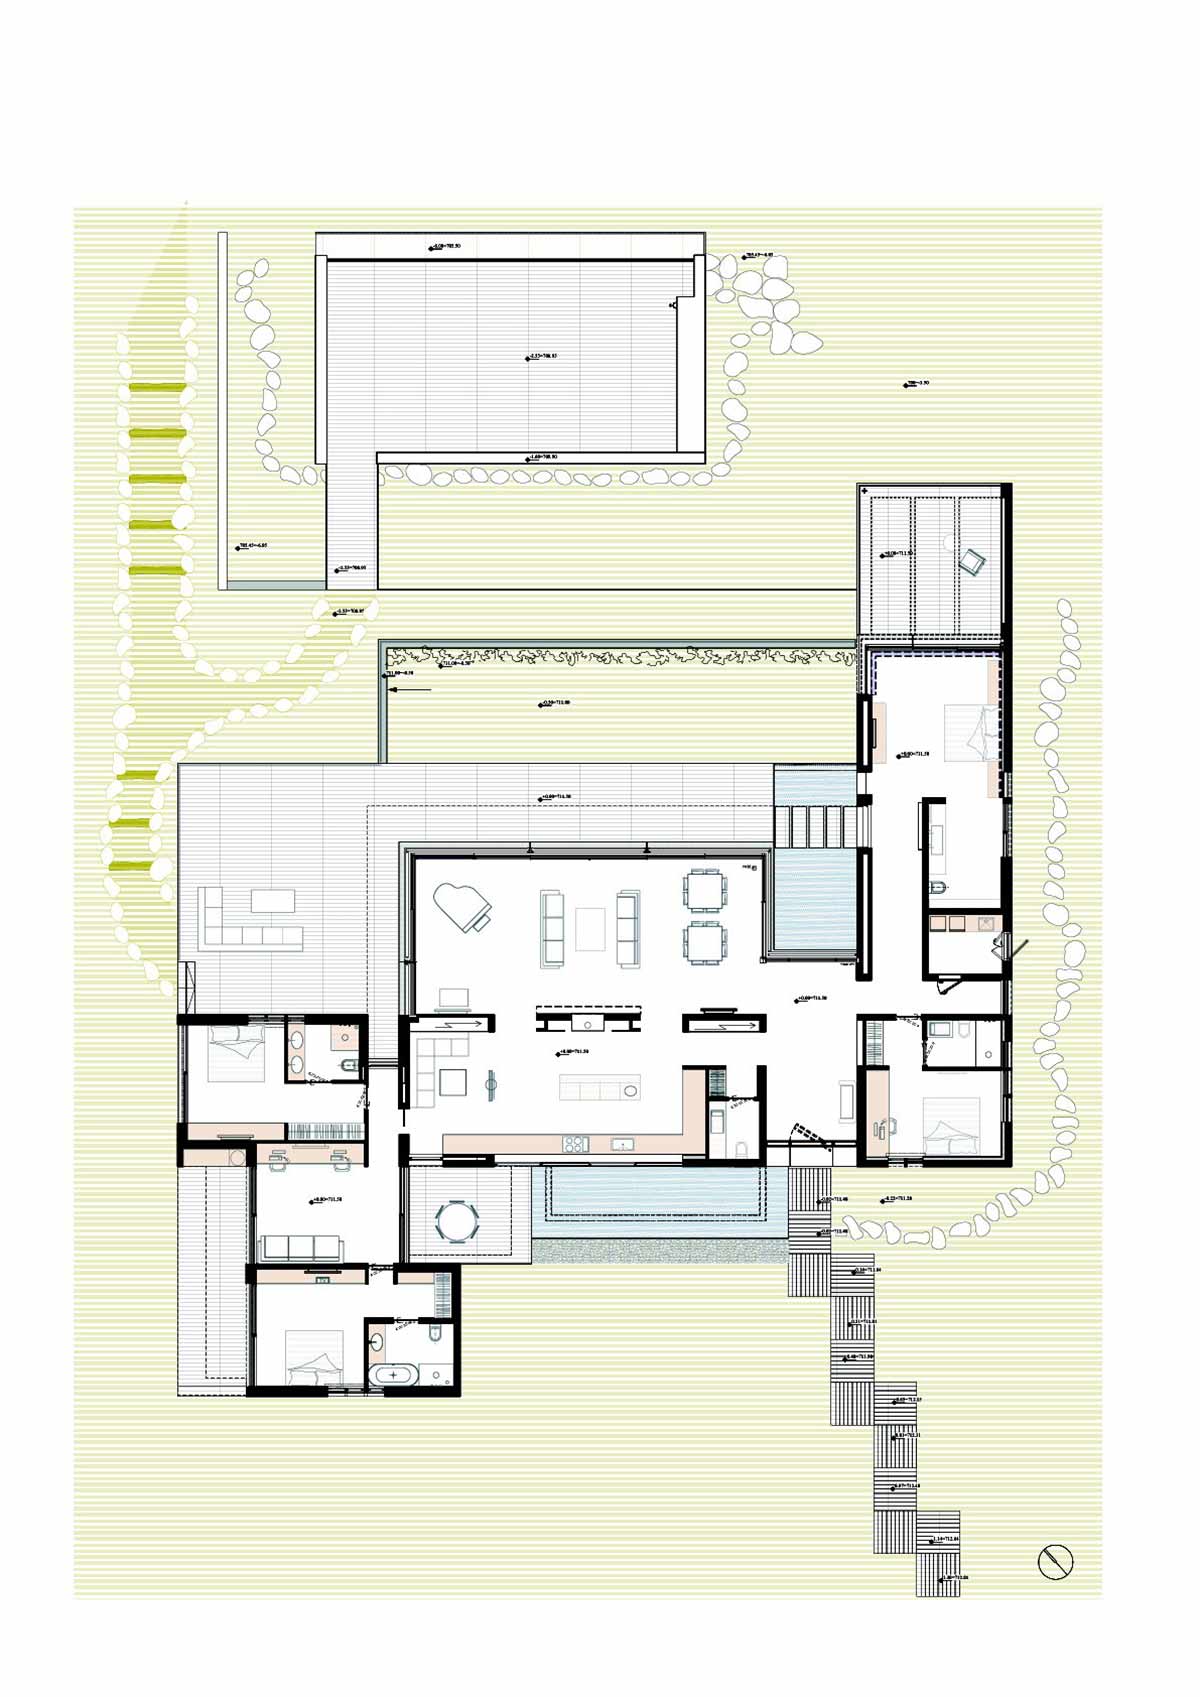 Plan, Hillside House Overlooking the Hahula Valley, Israel